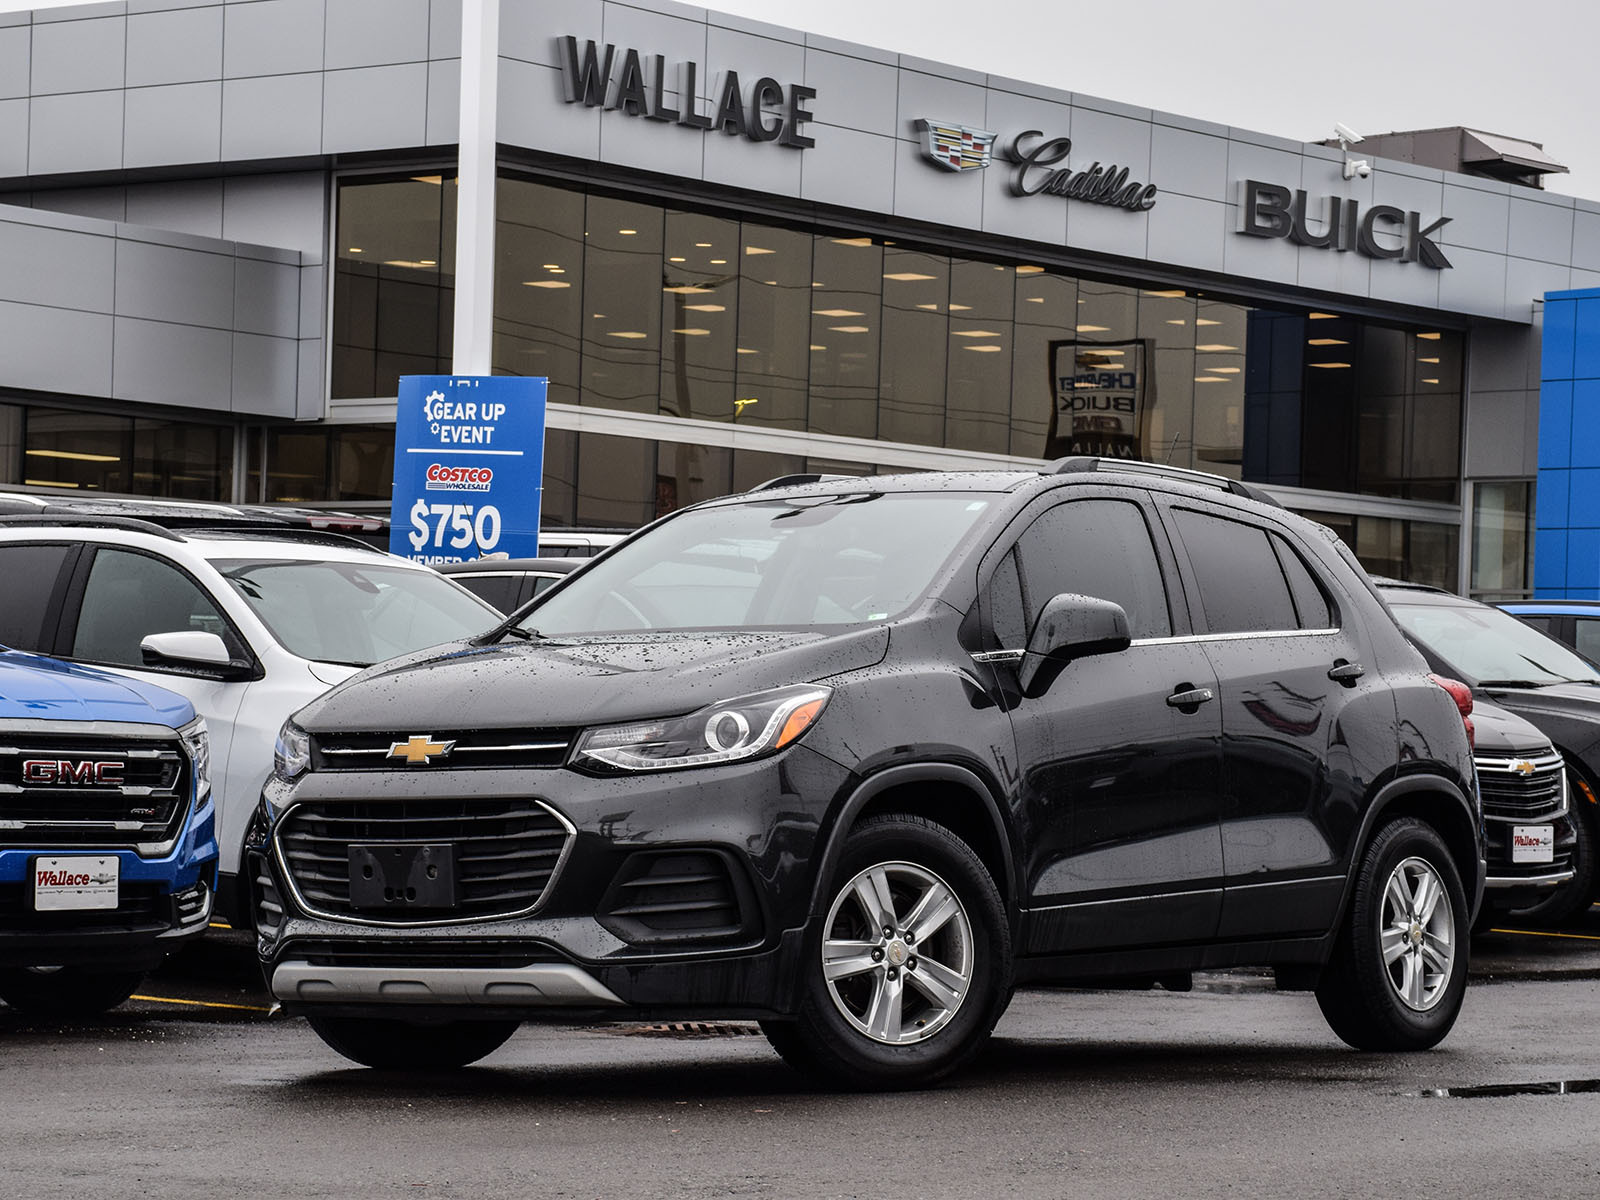 2017 Chevrolet Trax FWD 4dr LT, True North EDT. Sunroof, Back Up Cam